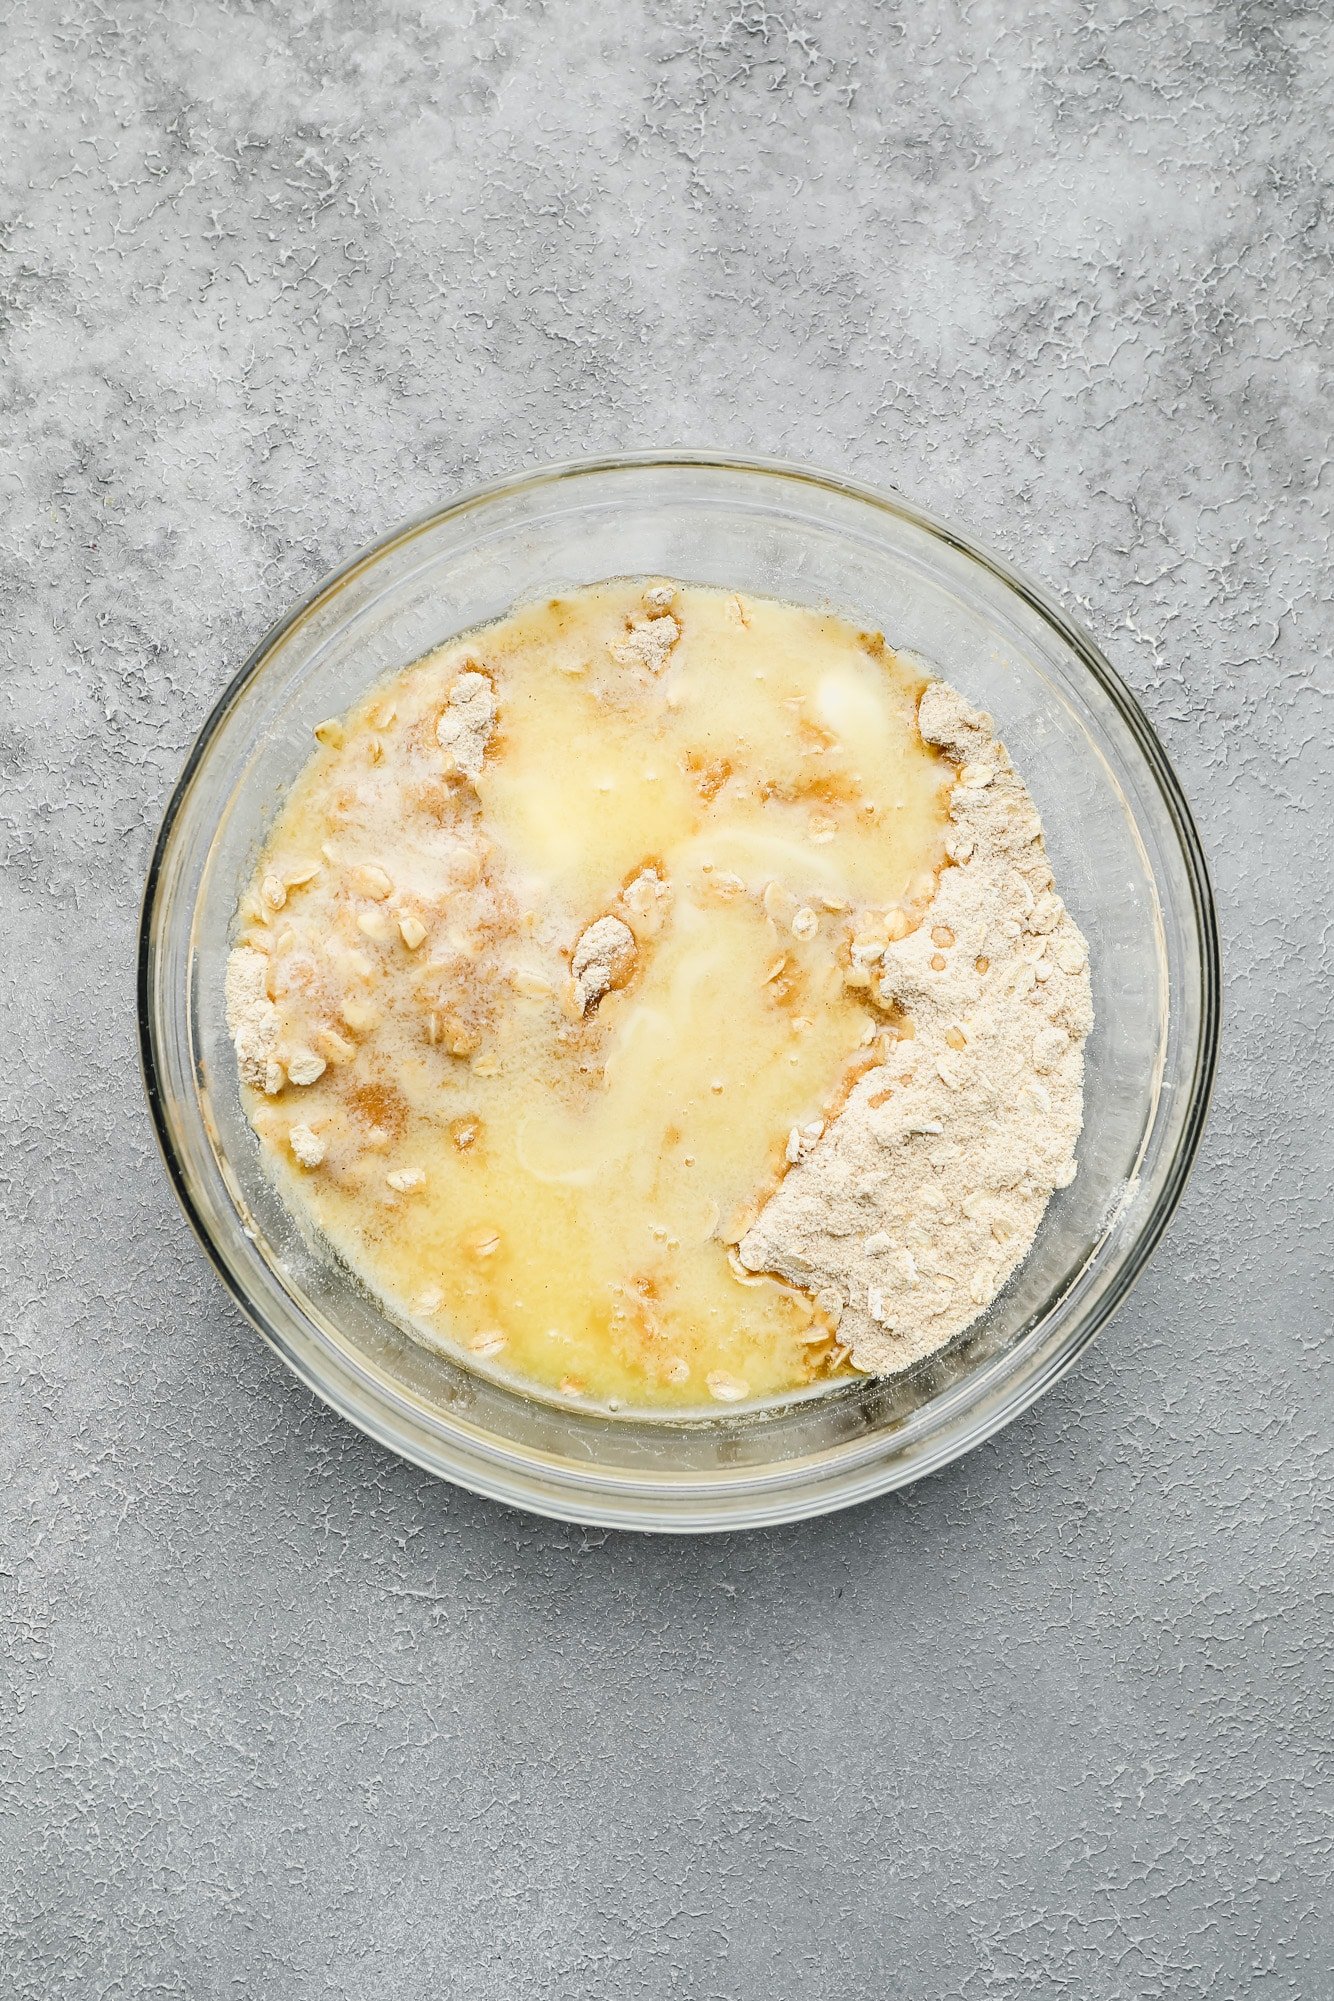 melted butter poured over flour, brown sugar, oats, and cinnamon in a glass bowl.